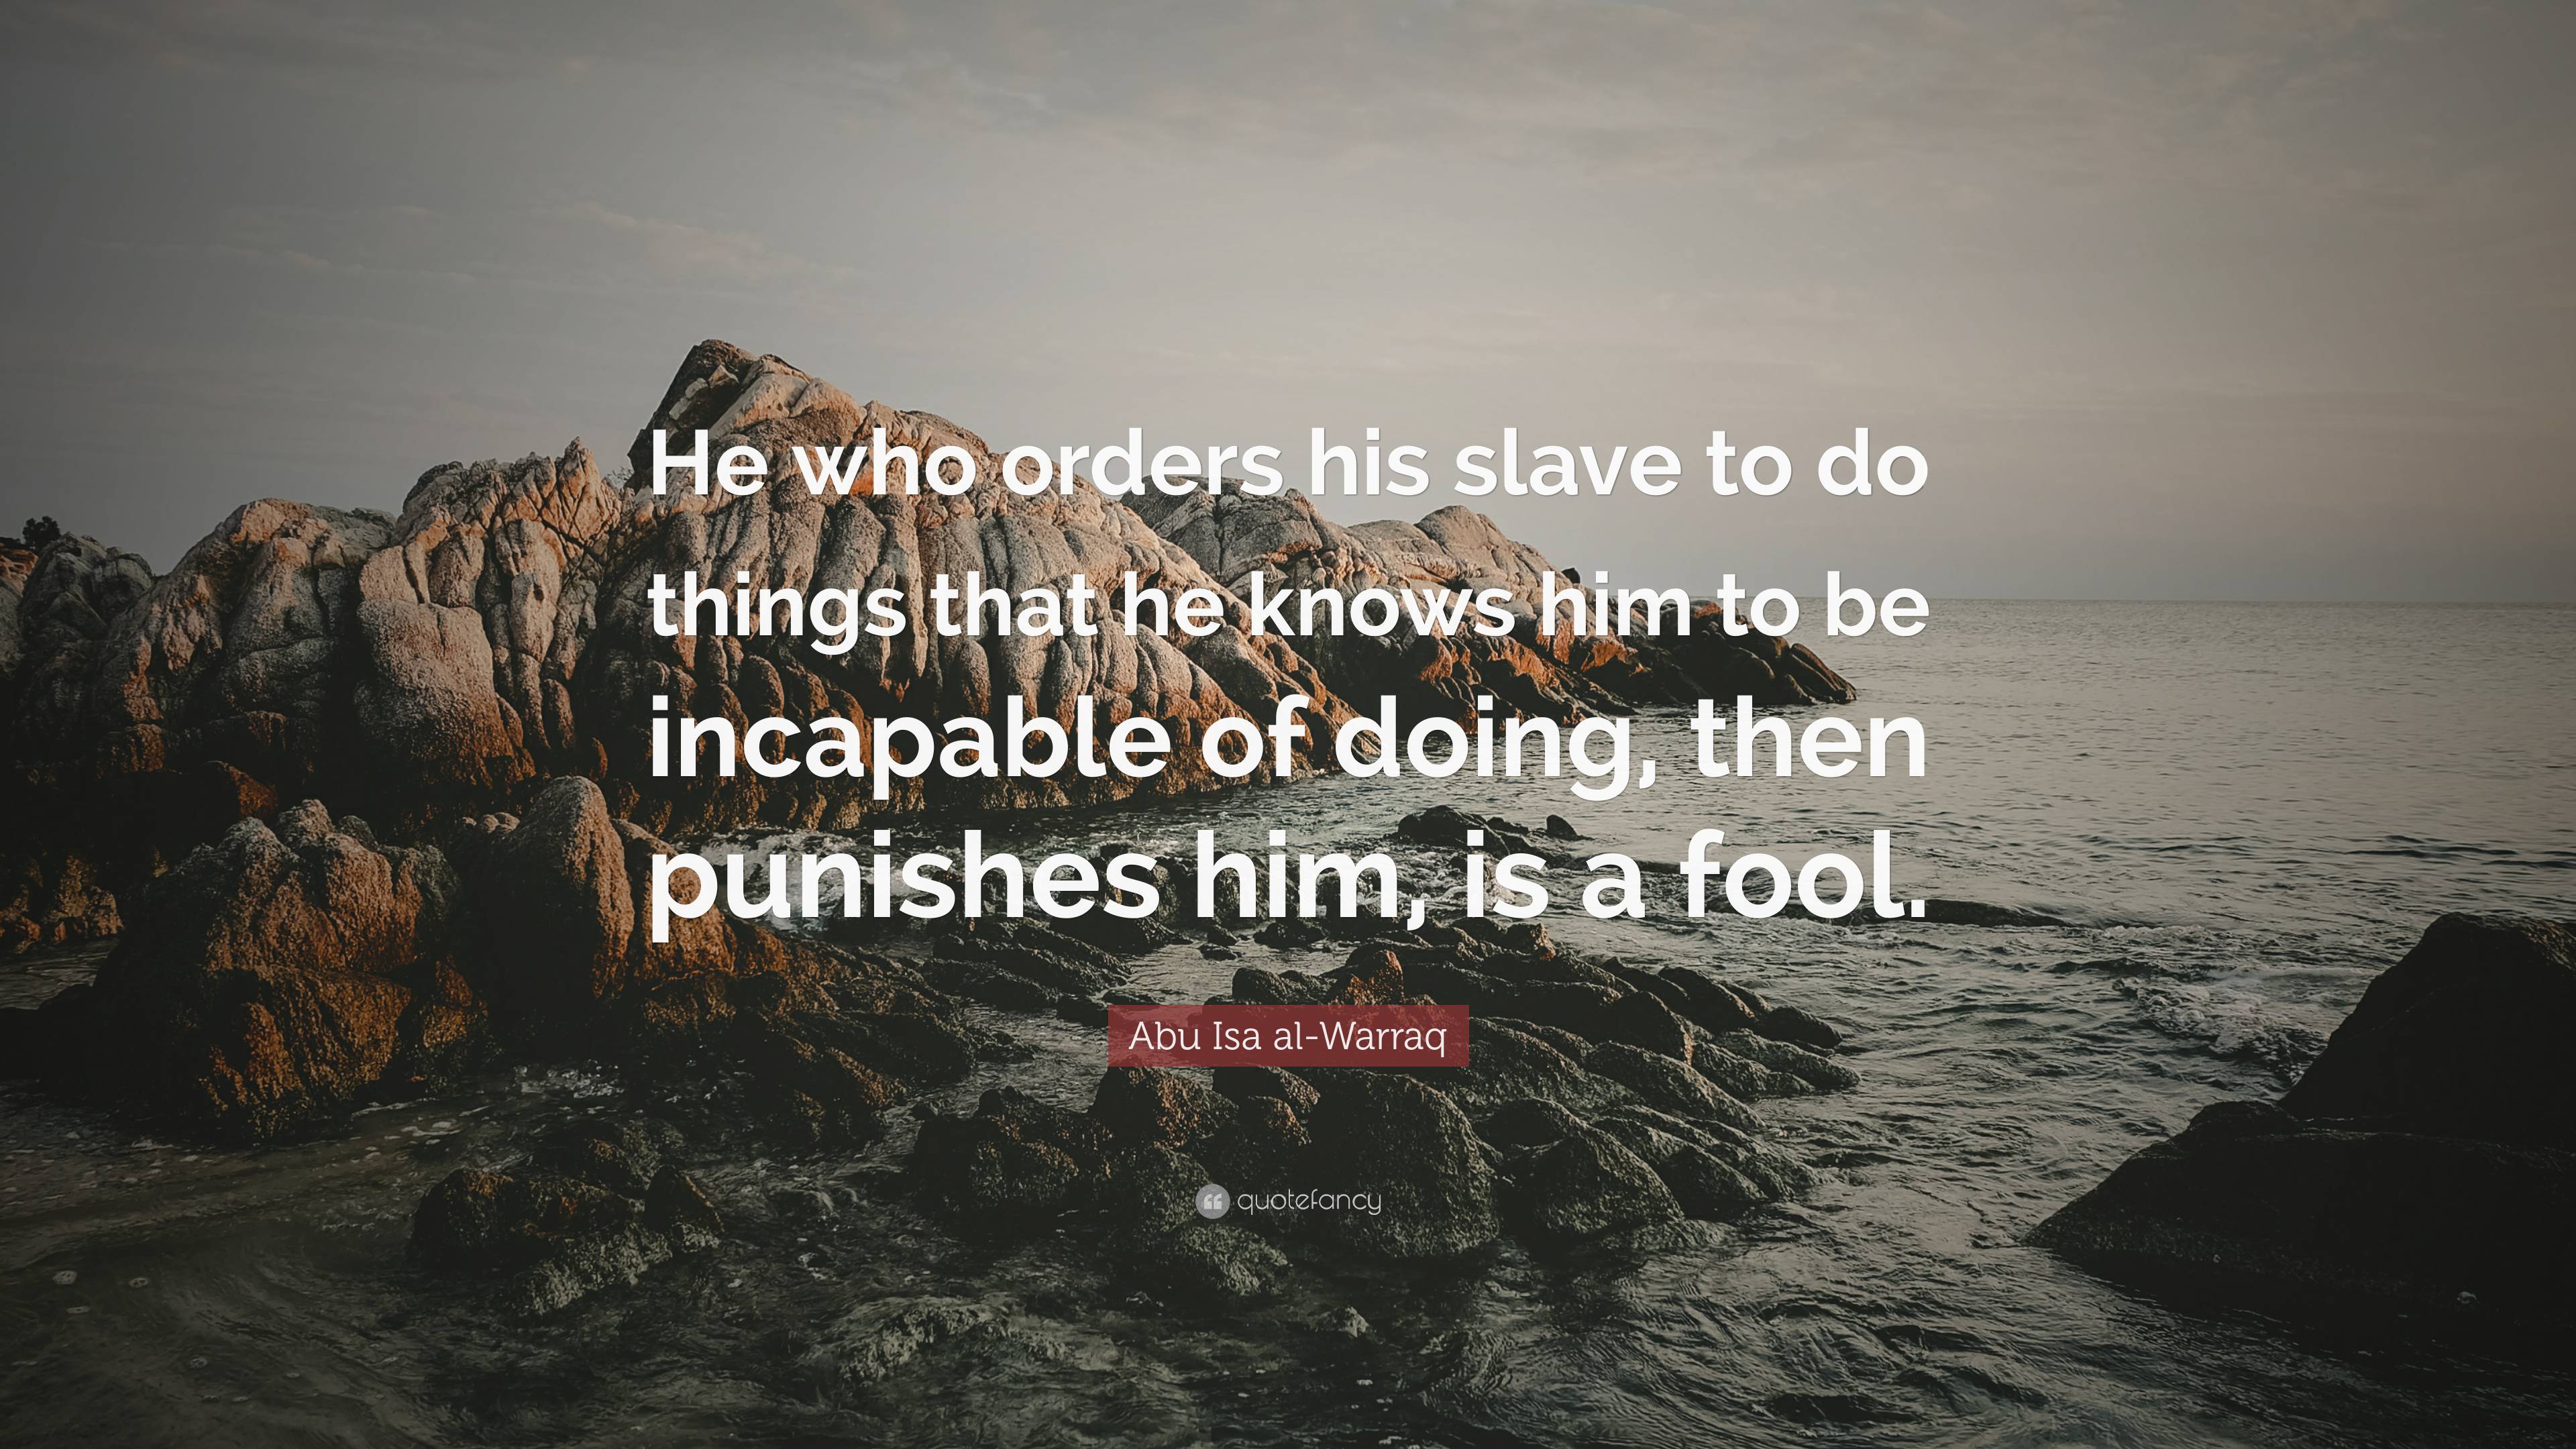 https://quotefancy.com/media/wallpaper/3840x2160/7558691-Abu-Isa-al-Warraq-Quote-He-who-orders-his-slave-to-do-things-that.jpg